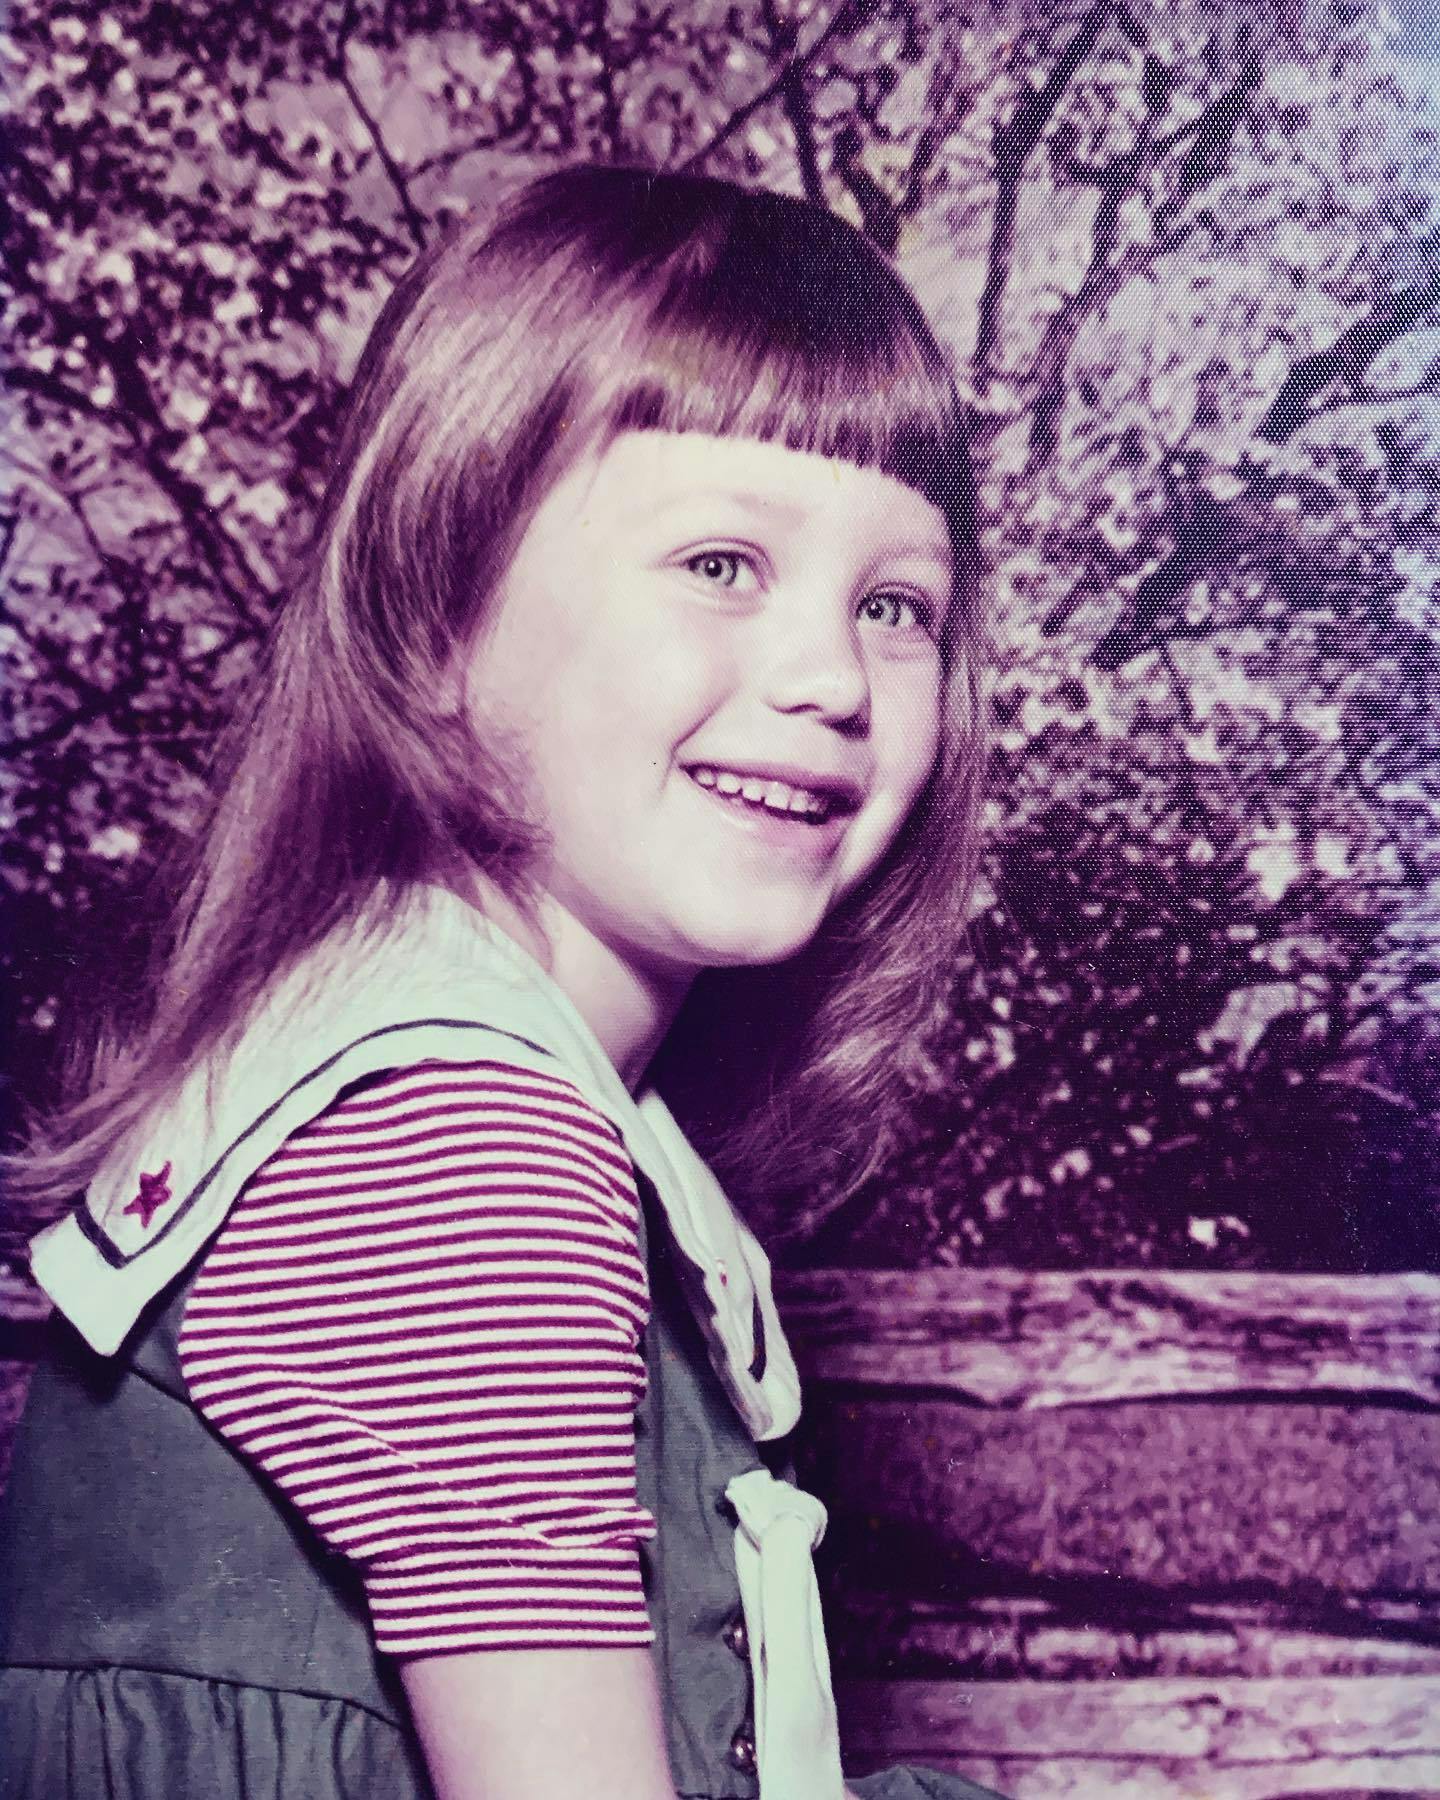 If you could go back in time and have a chat with your 5 year old self...

What would you say that would help you feel confident and powerful as you developed into the person that you are today? ❤️☺️

I would totally tell her to always listen to her gut and speak up because she does know what she needs and wants 🥰👍🏻😎

#yourlittleoneneedstoknow
#transformationalcoaching 
#beinginyourpower💗
#flashbackfriday💓